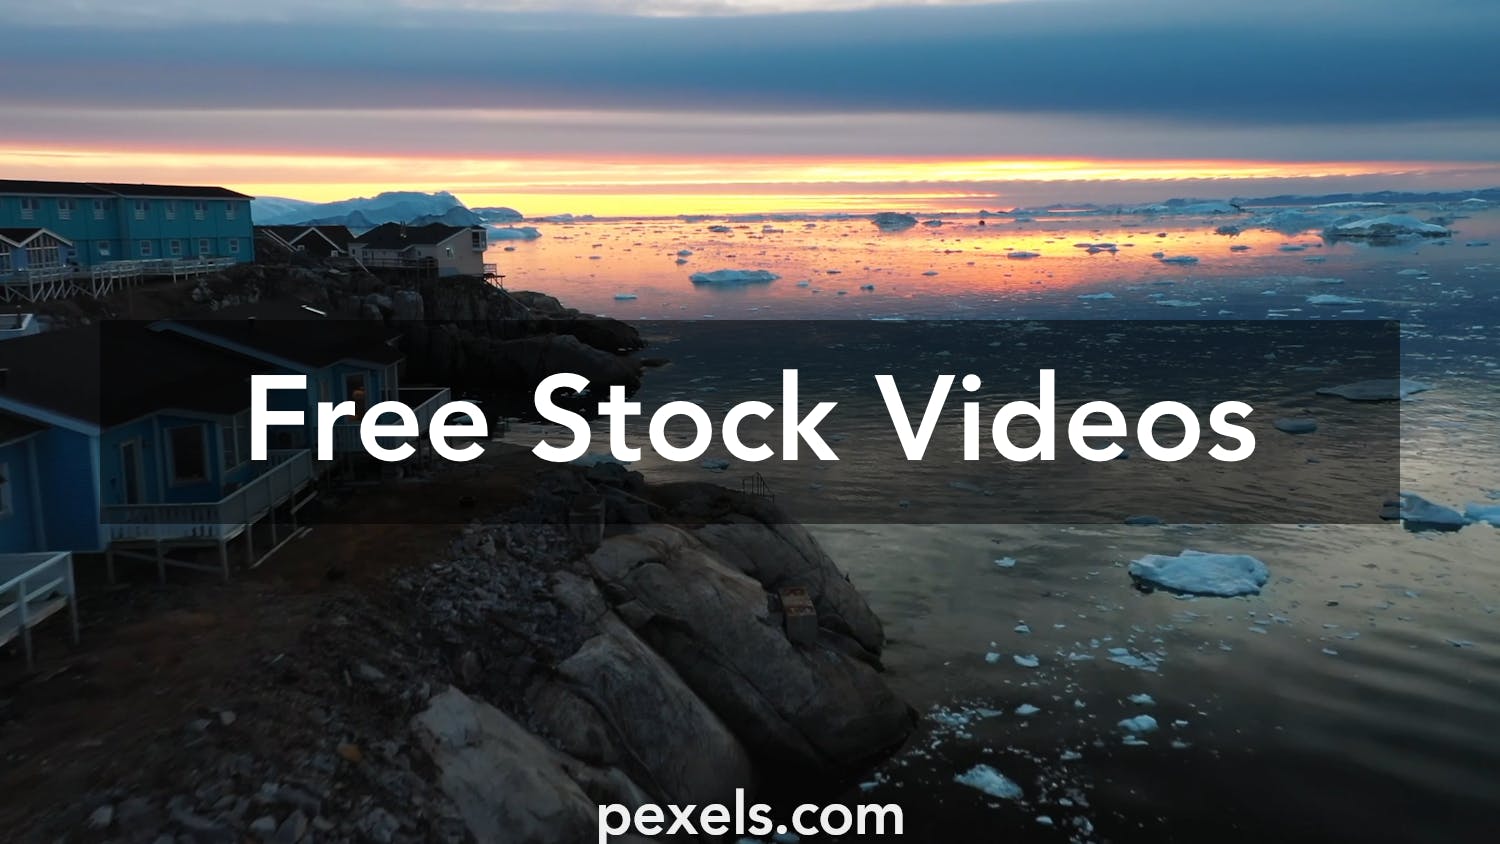 Giant Hours York Pa Videos, Download The BEST Free 4k Stock Video